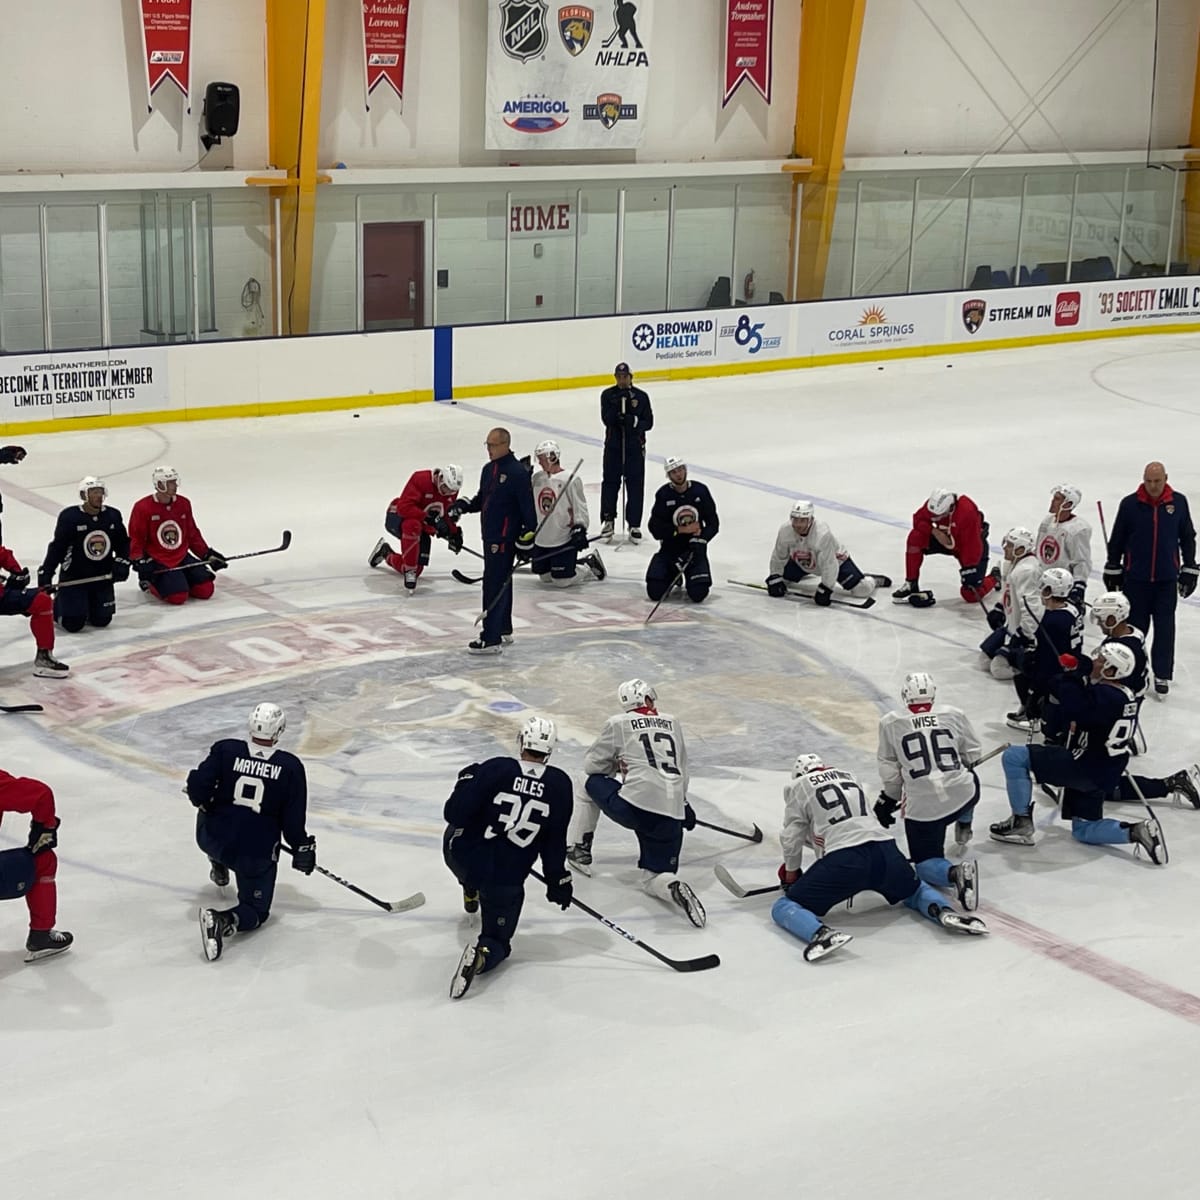 Three questions facing the Florida Panthers heading into training